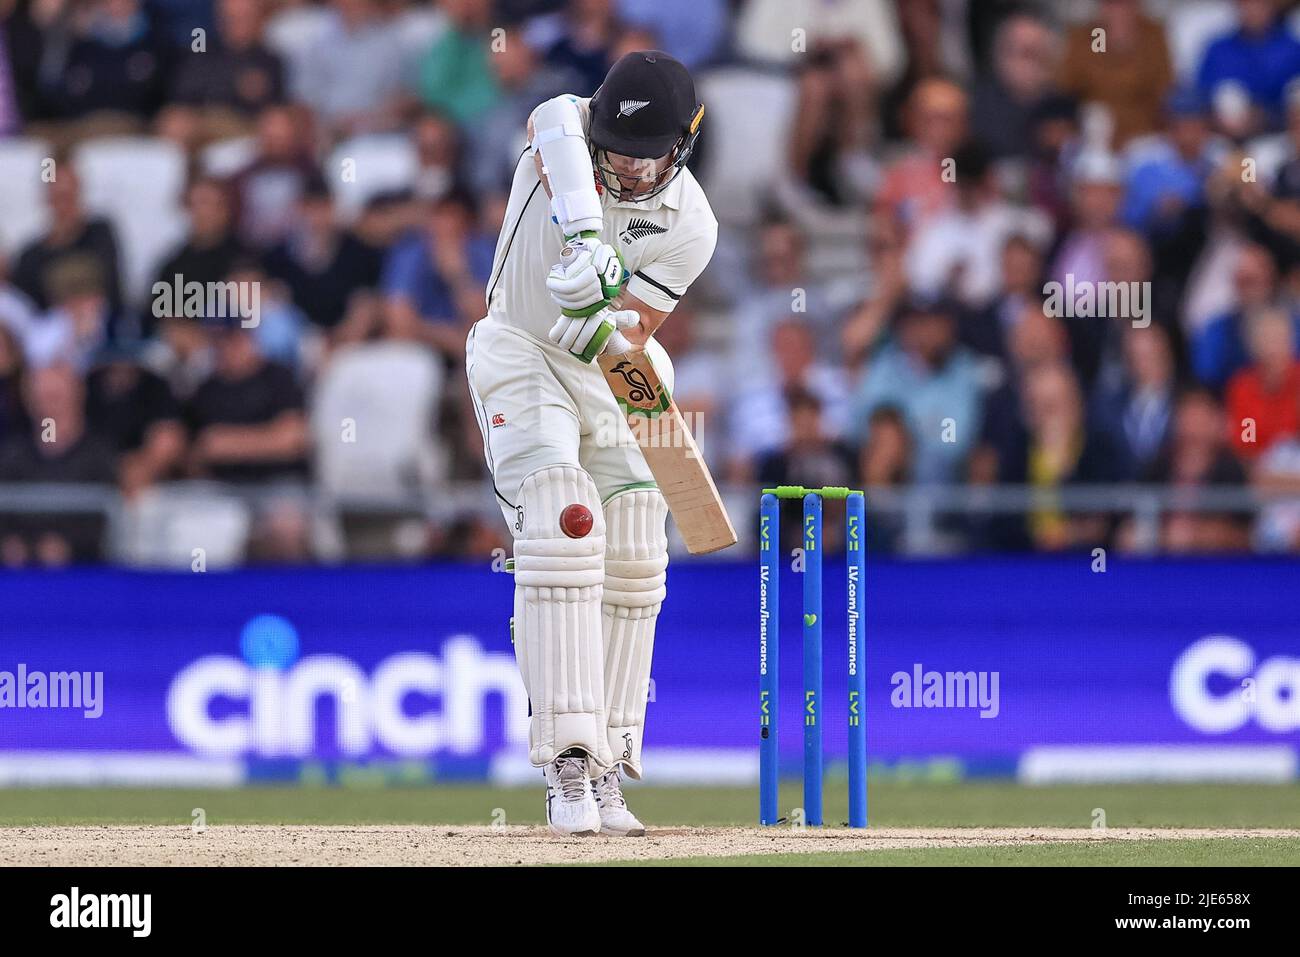 Leeds, UK. 25th June, 2022. Tom Latham of New Zealand in action during the game in Leeds, United Kingdom on 6/25/2022. (Photo by Mark Cosgrove/News Images/Sipa USA) Credit: Sipa USA/Alamy Live News Stock Photo